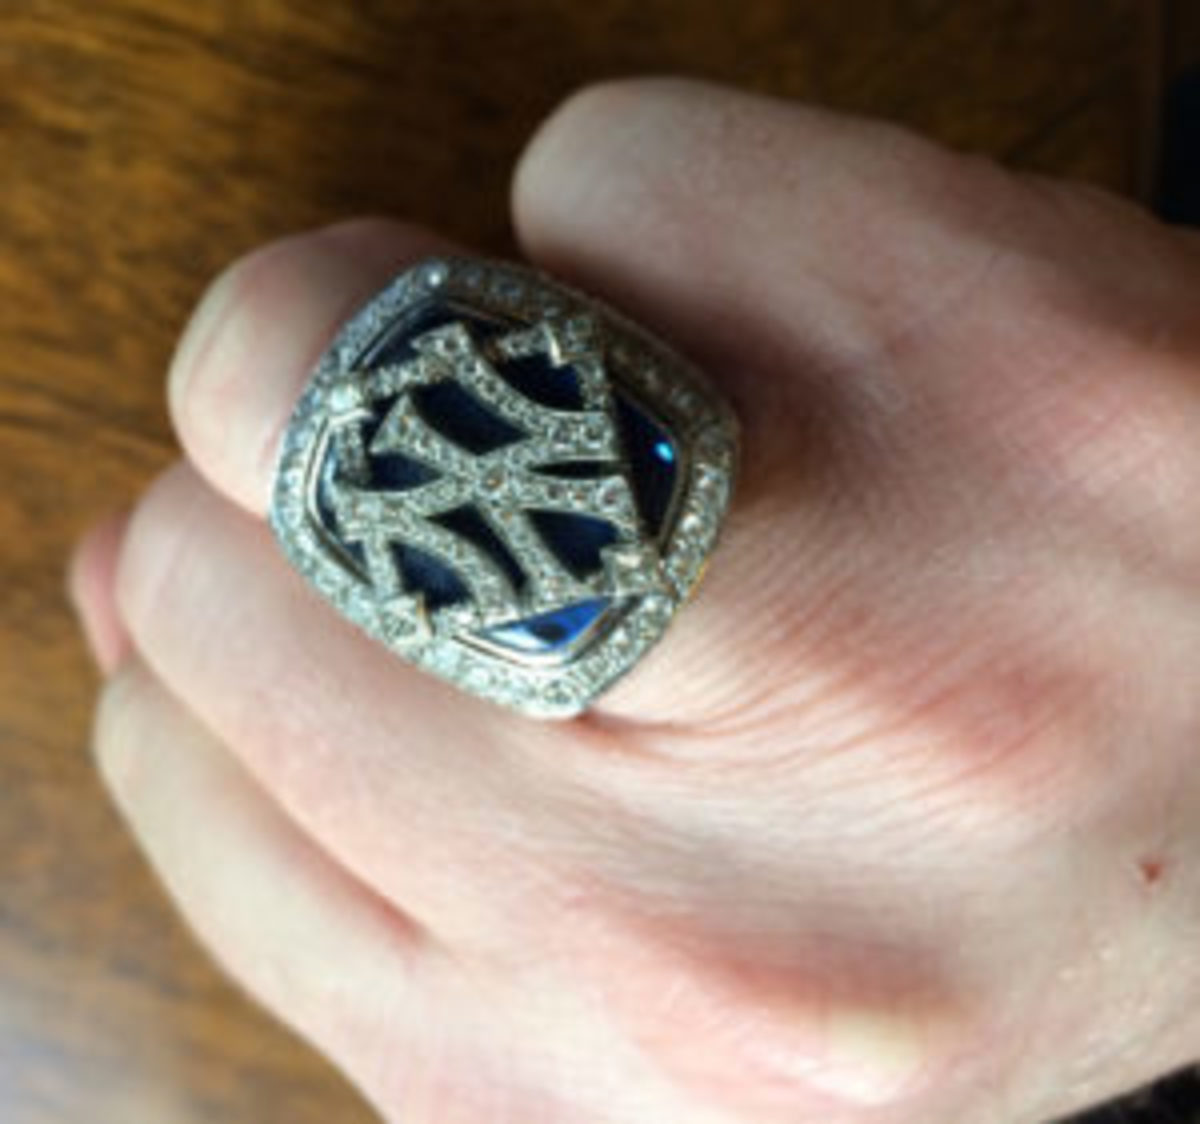  Dana Cavalea displays the World Series championship ring the New York Yankees gave him after the Yankees won the 2009 World Series. (Paul Post Photo)